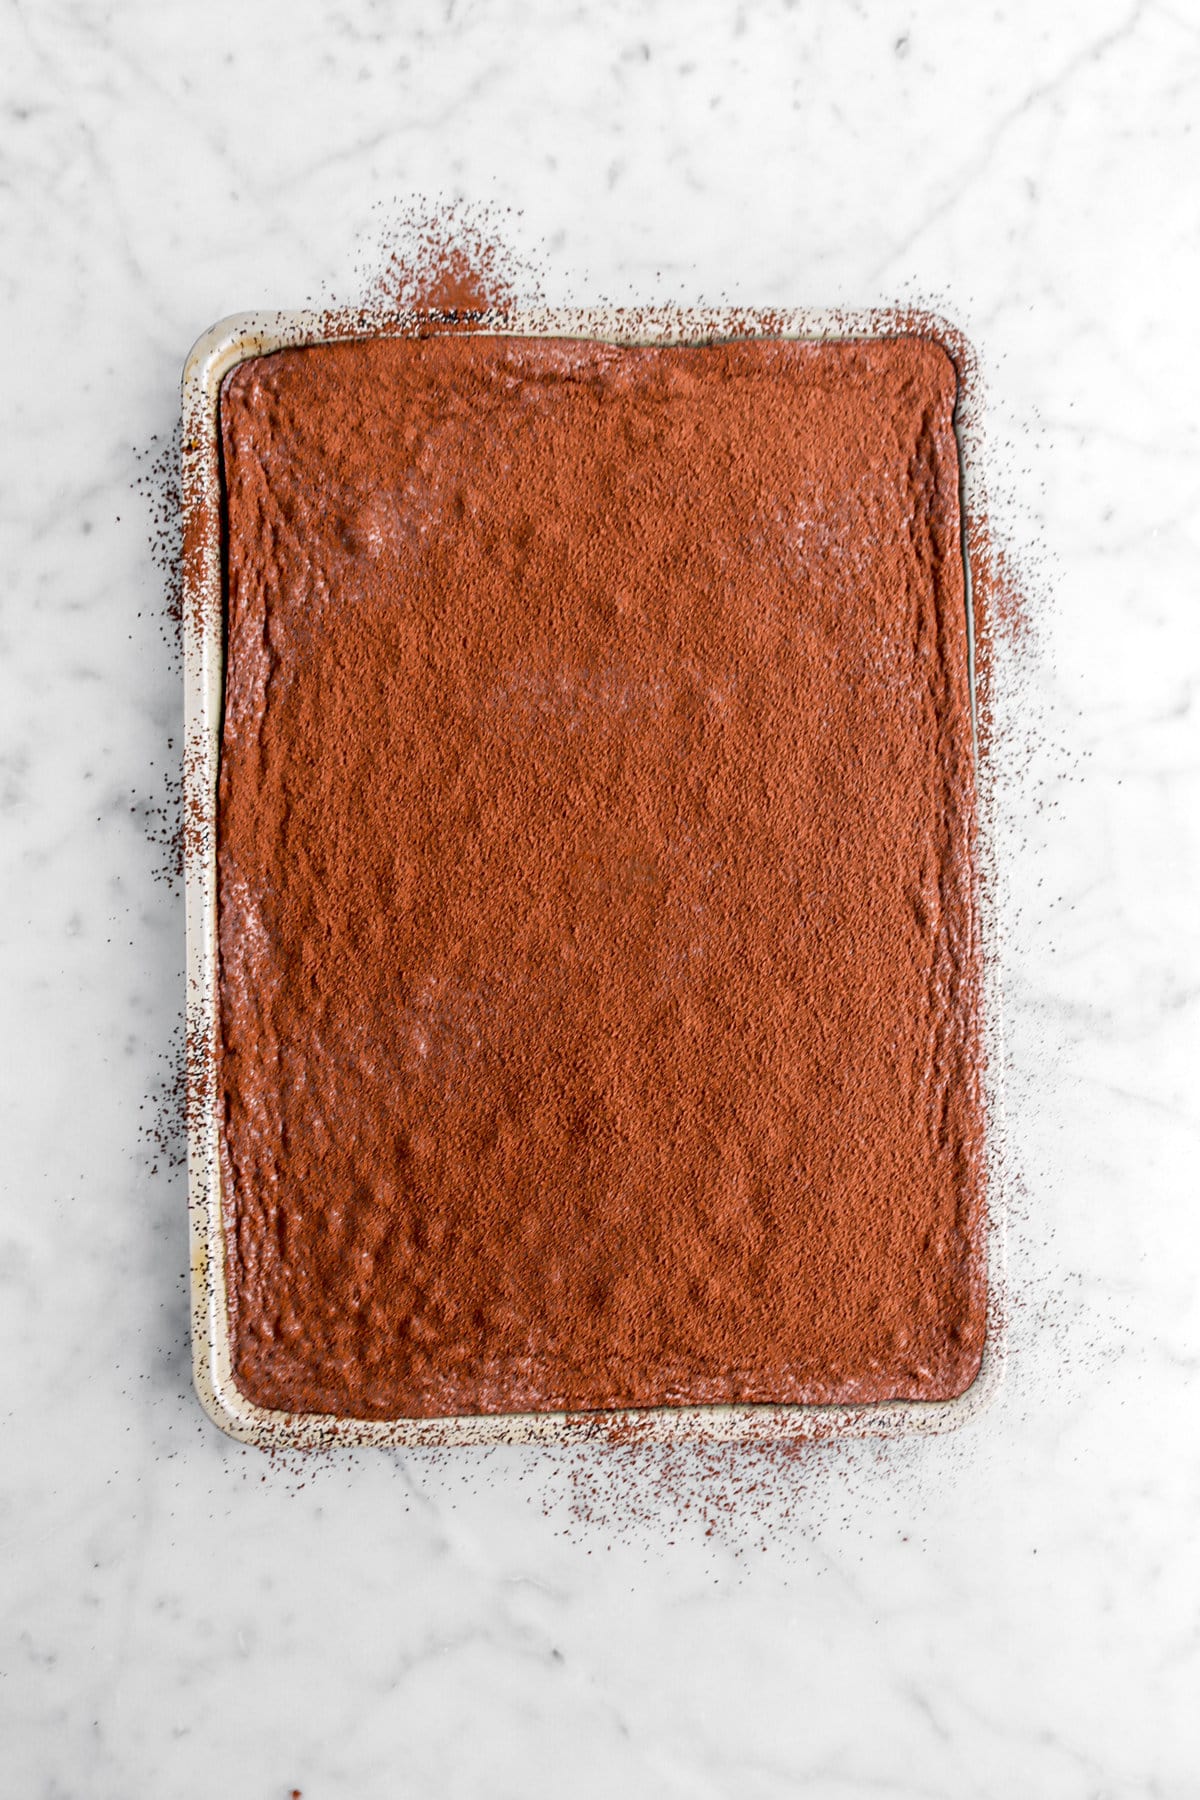 cake dusted with cocoa powder in sheet pan.